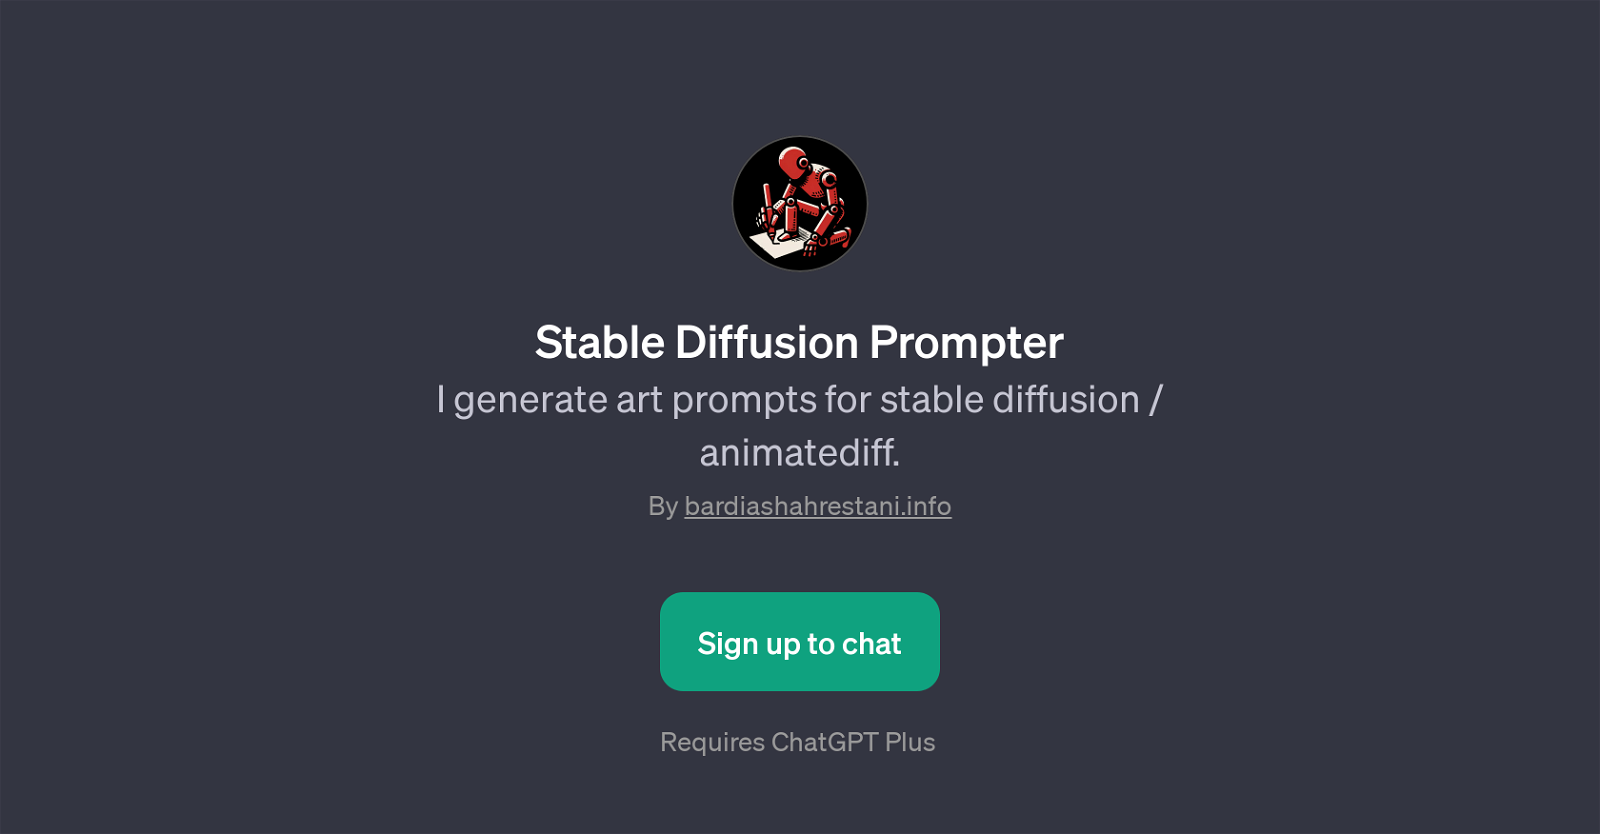 Stable Diffusion Prompter website